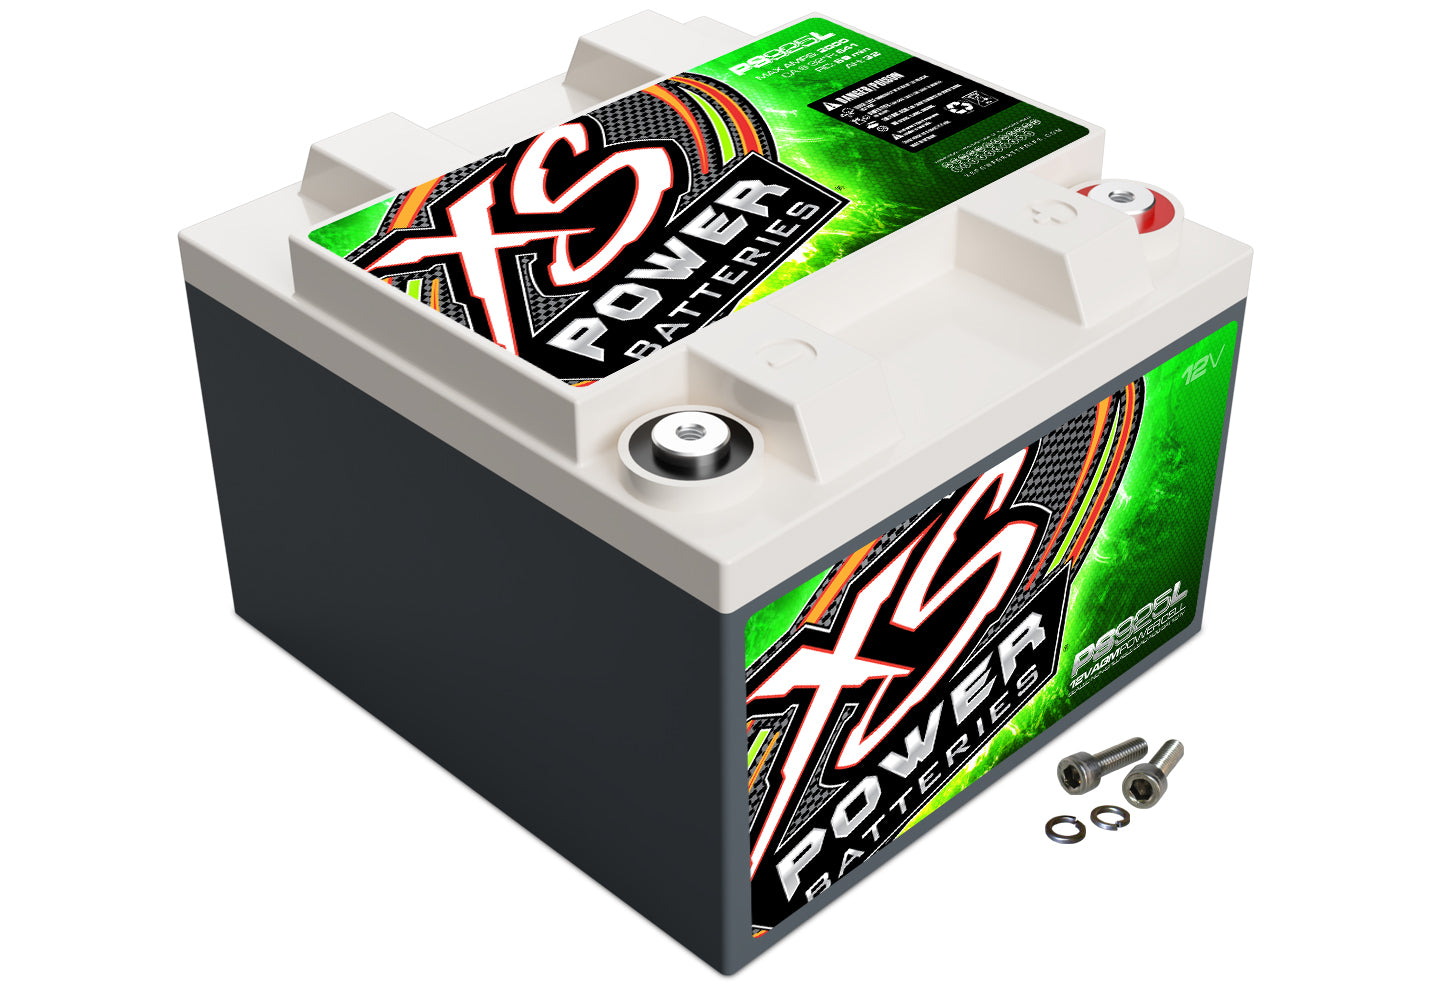 PS925L XS Power 12VDC AGM Powersports Vehicle Battery 2000A 32Ah